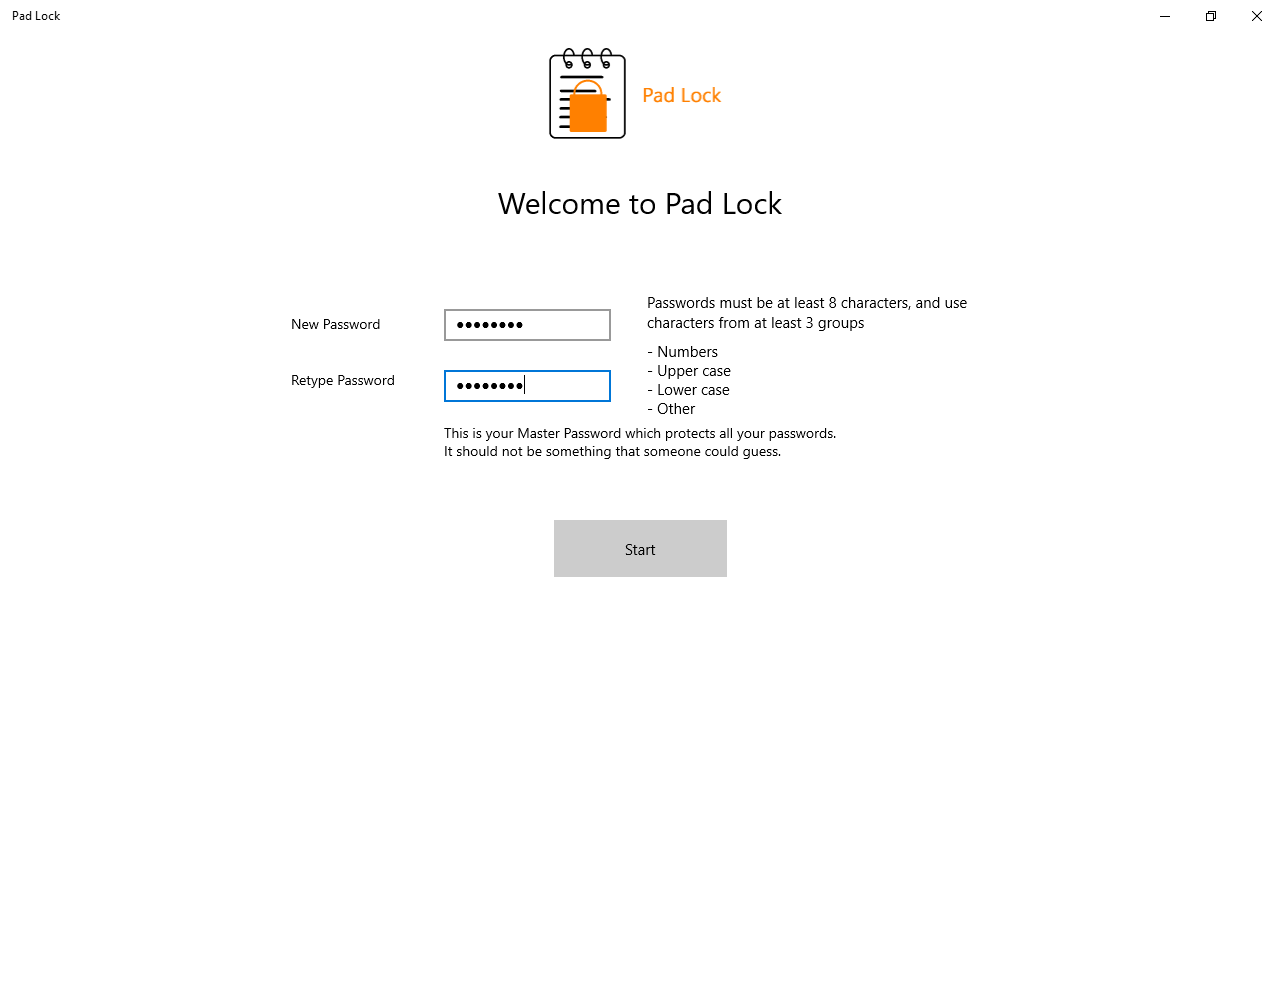 Master password setup - only required once.  
Enter this every time you open Pad Lock